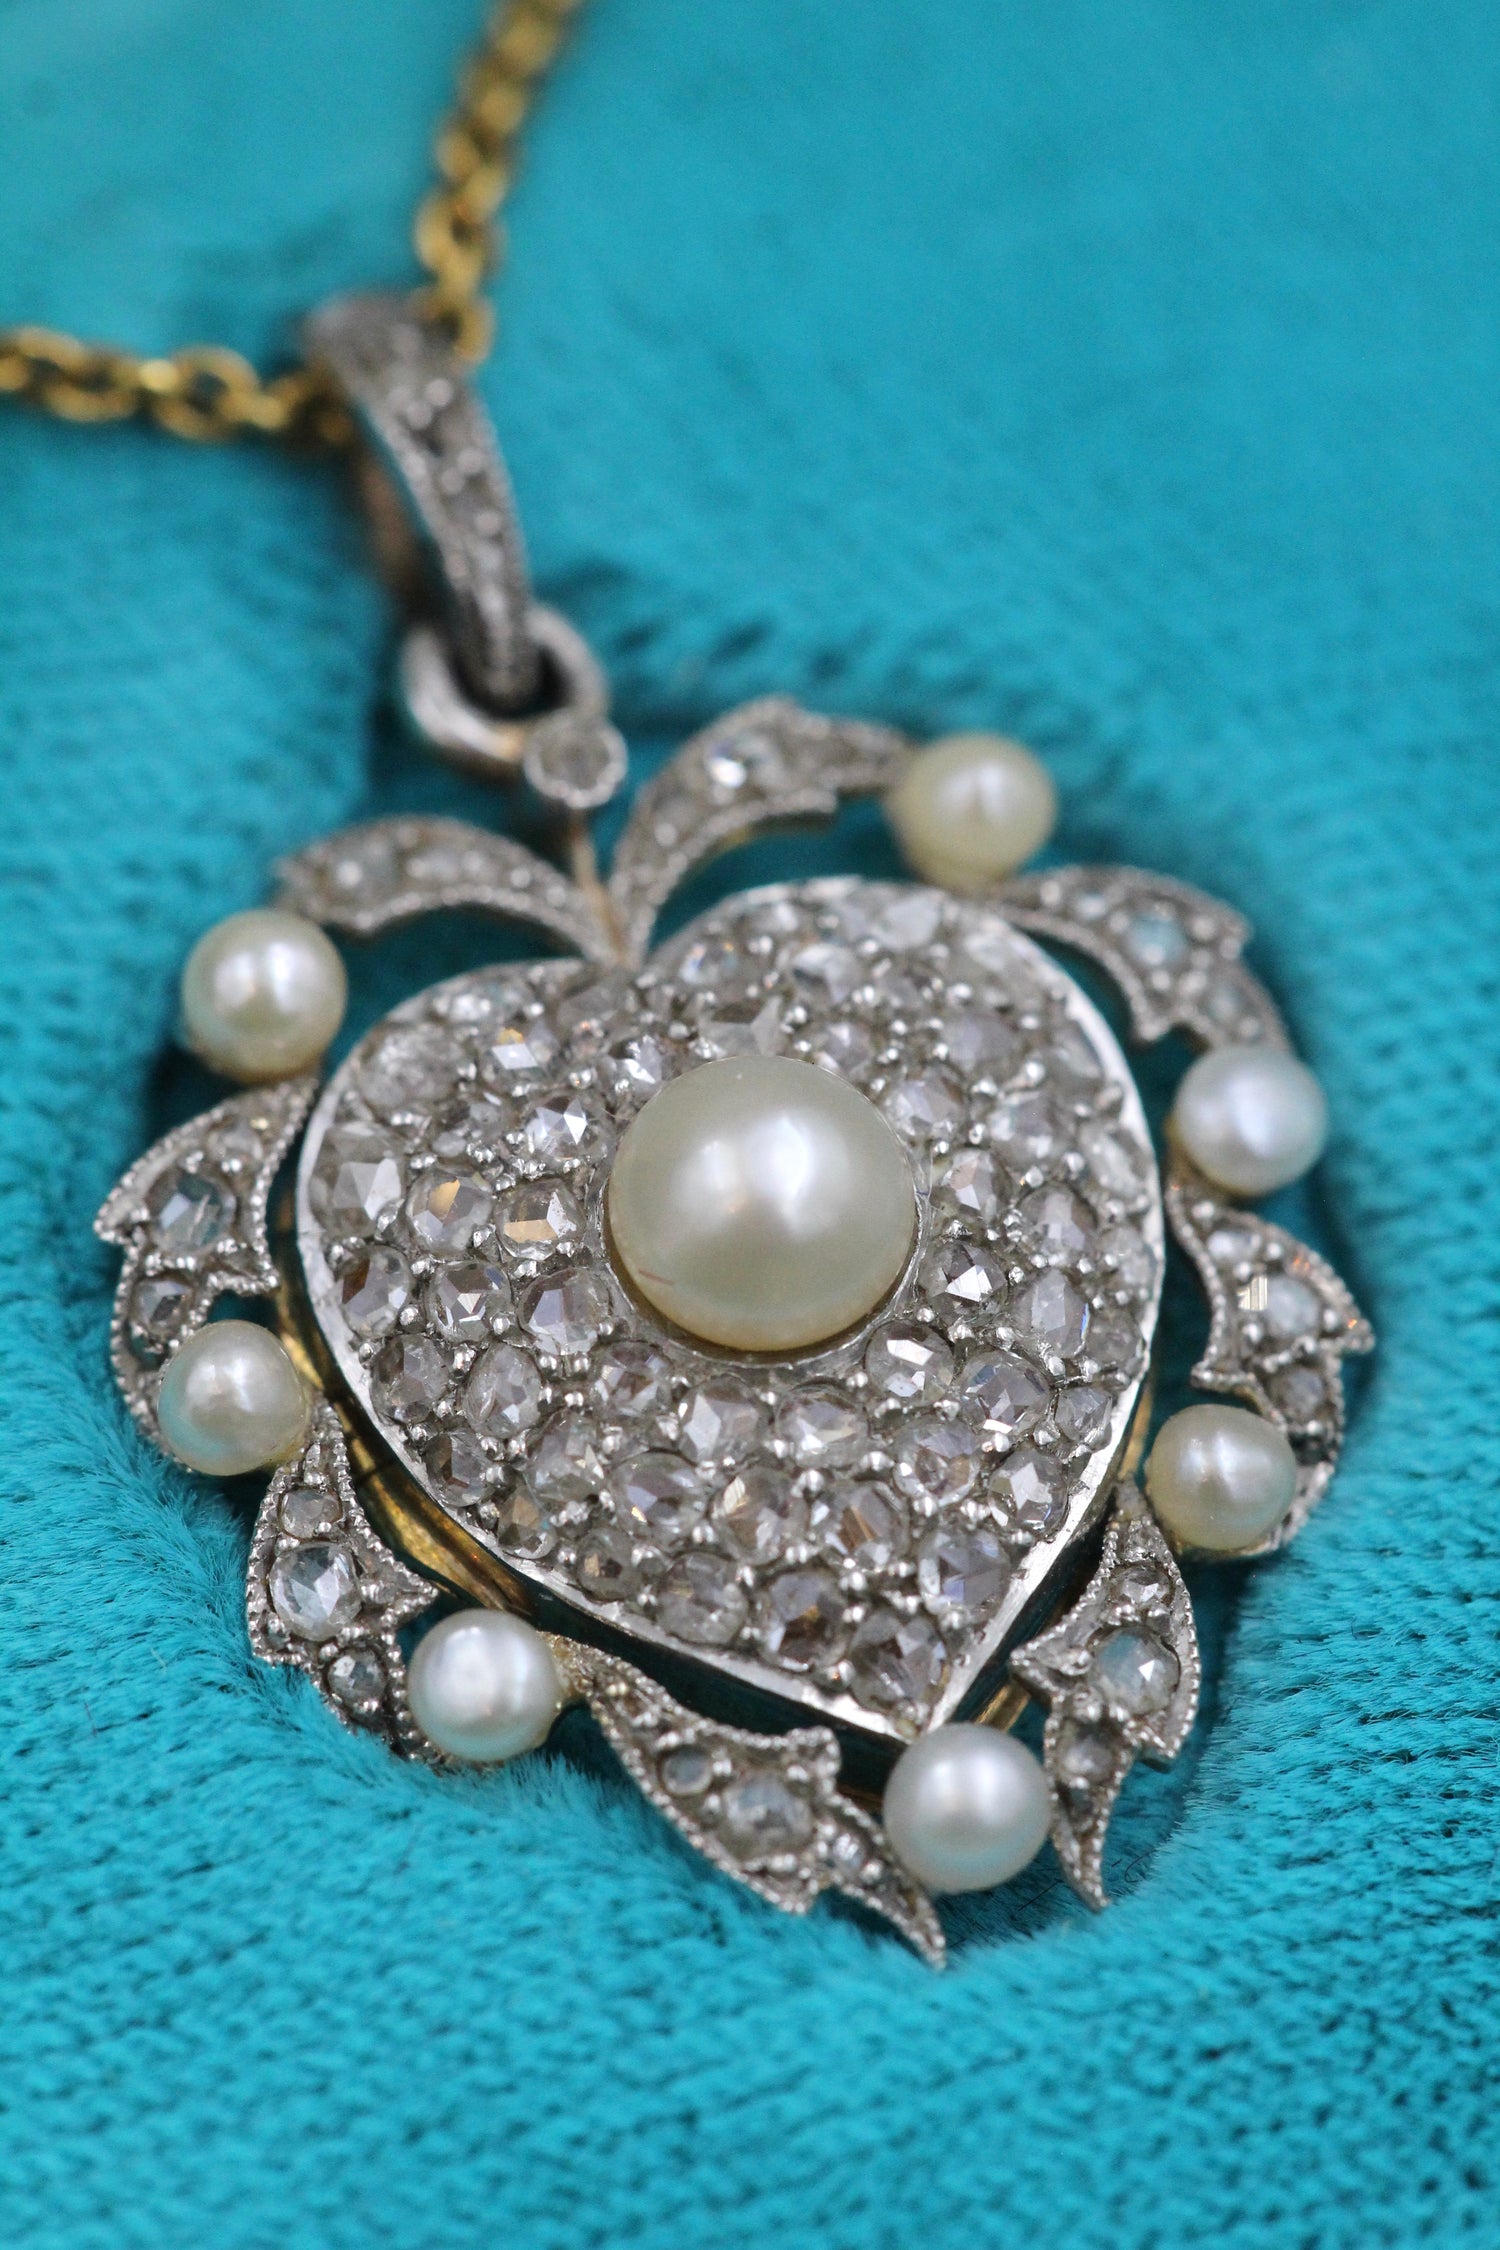 A very fine Victorian 15ct Yellow Gold (tested) & Platinum Heart Shaped Pearl and Diamond Locket Pendant. Circa 1900 - Robin Haydock Antiques